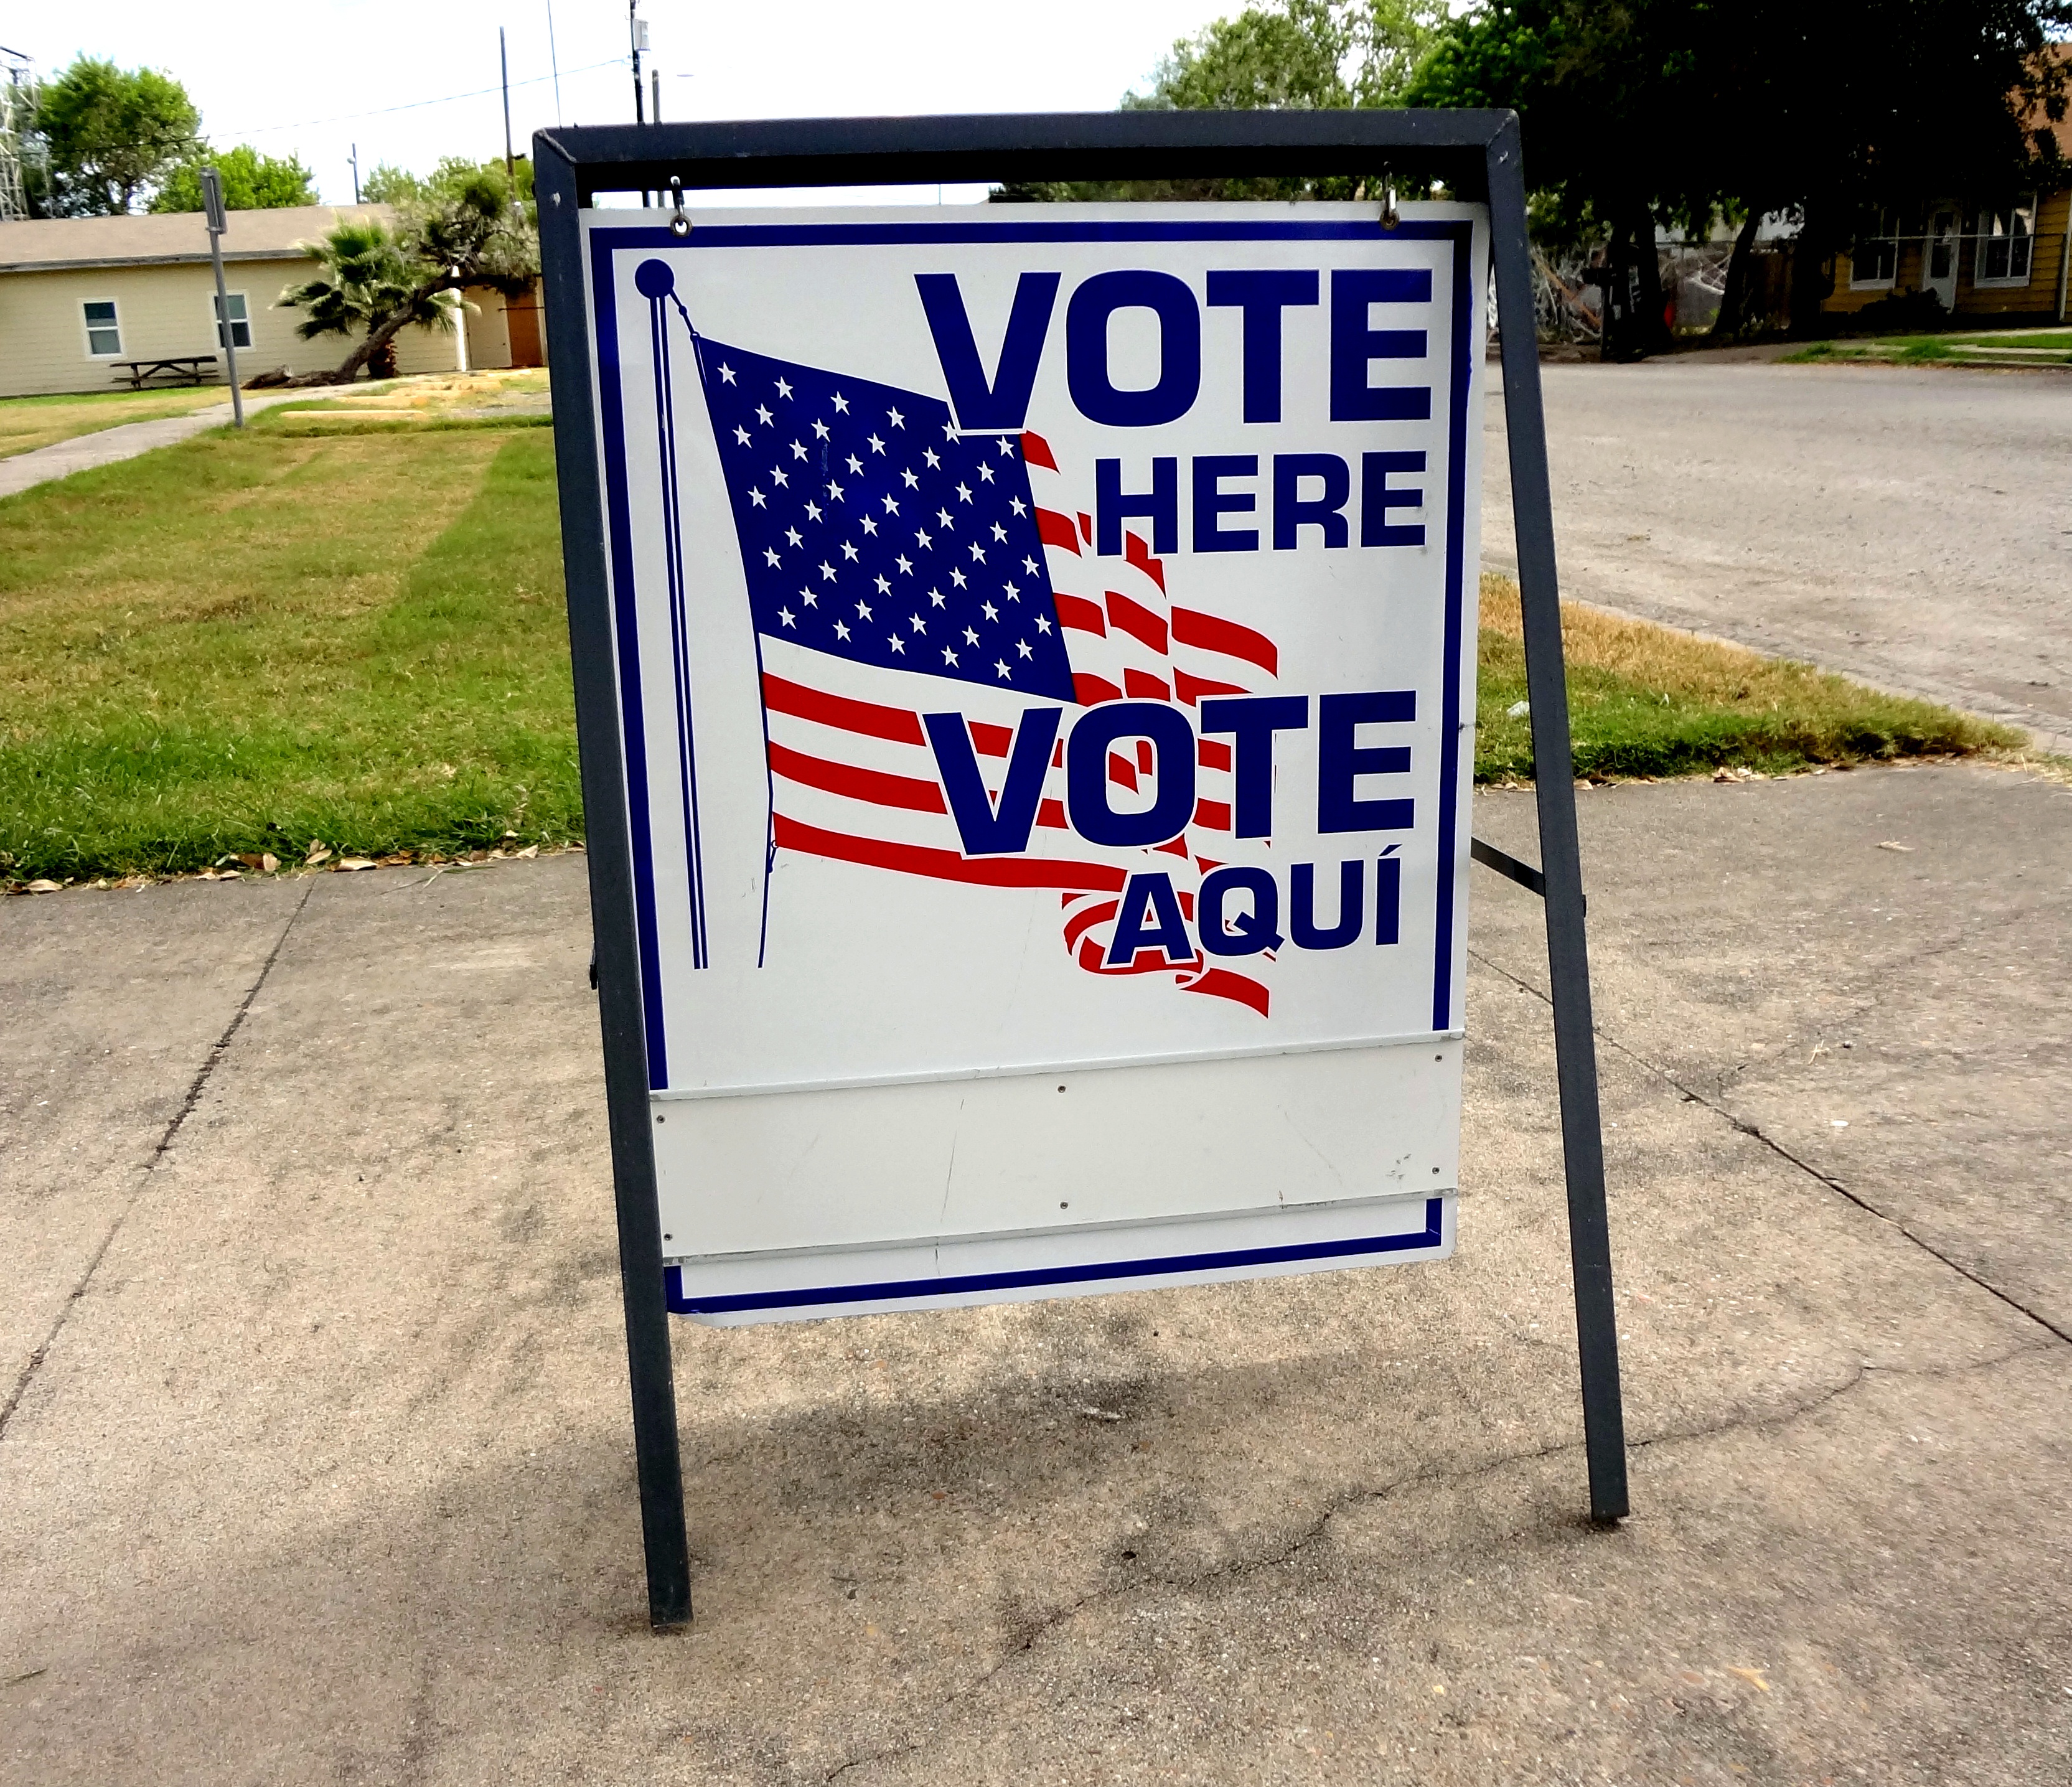 Texas Republicans ask federal judge to throw out 100,000 curbside ballots